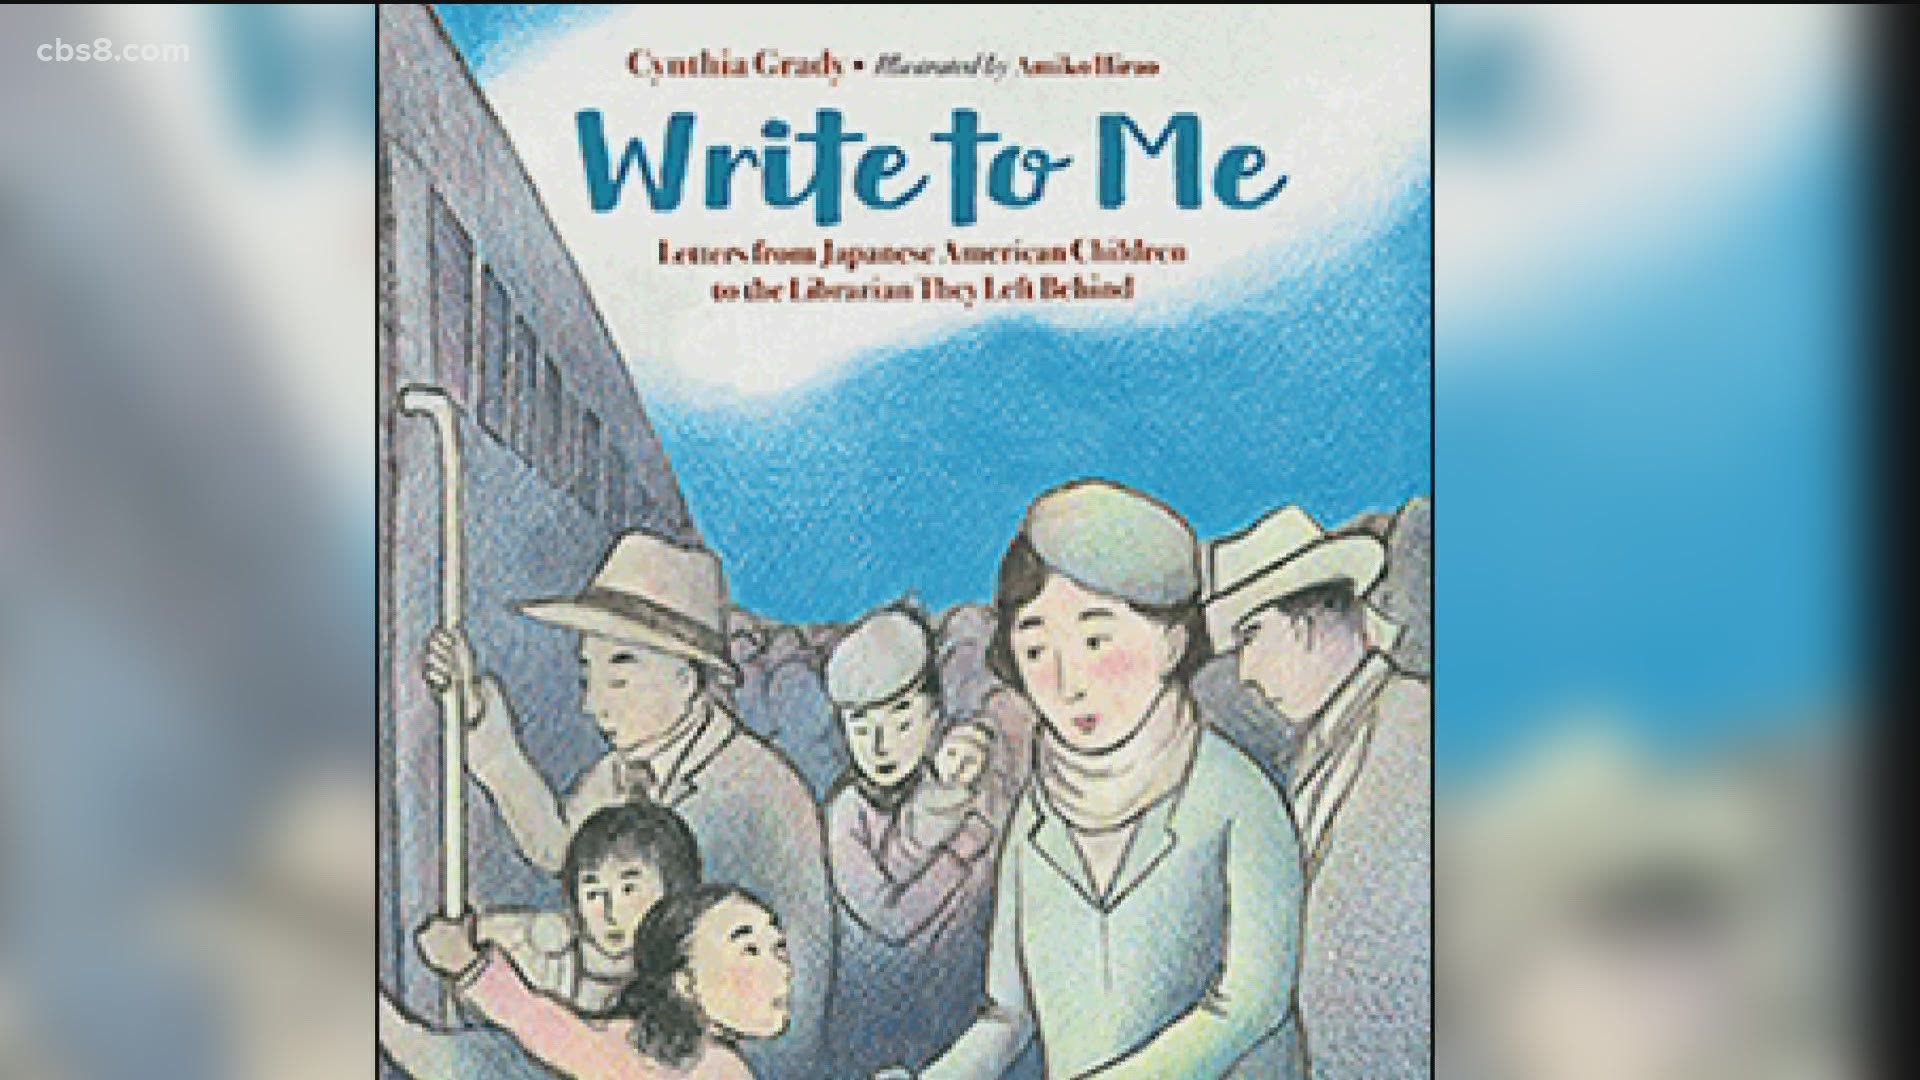 Author Cynthia Grady joined Morning Extra to talk about her book 'Write to Me' and she also talked about what she hopes people get out of it.